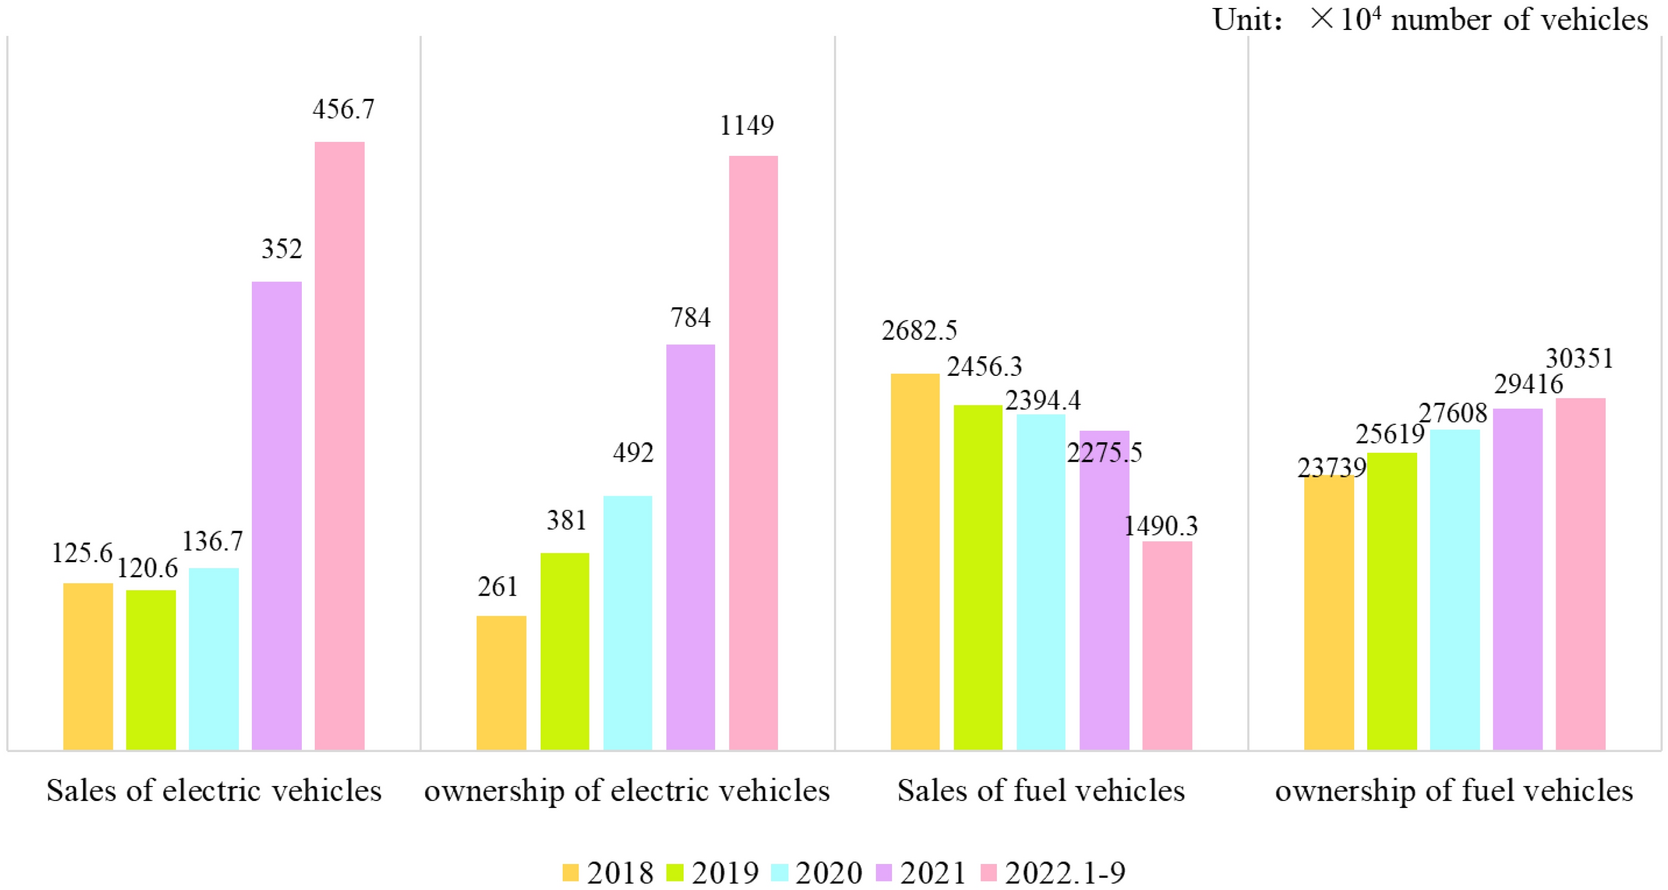 Life cycle environmental impact assessment for battery-powered electric  vehicles at the global and regional levels | Scientific Reports